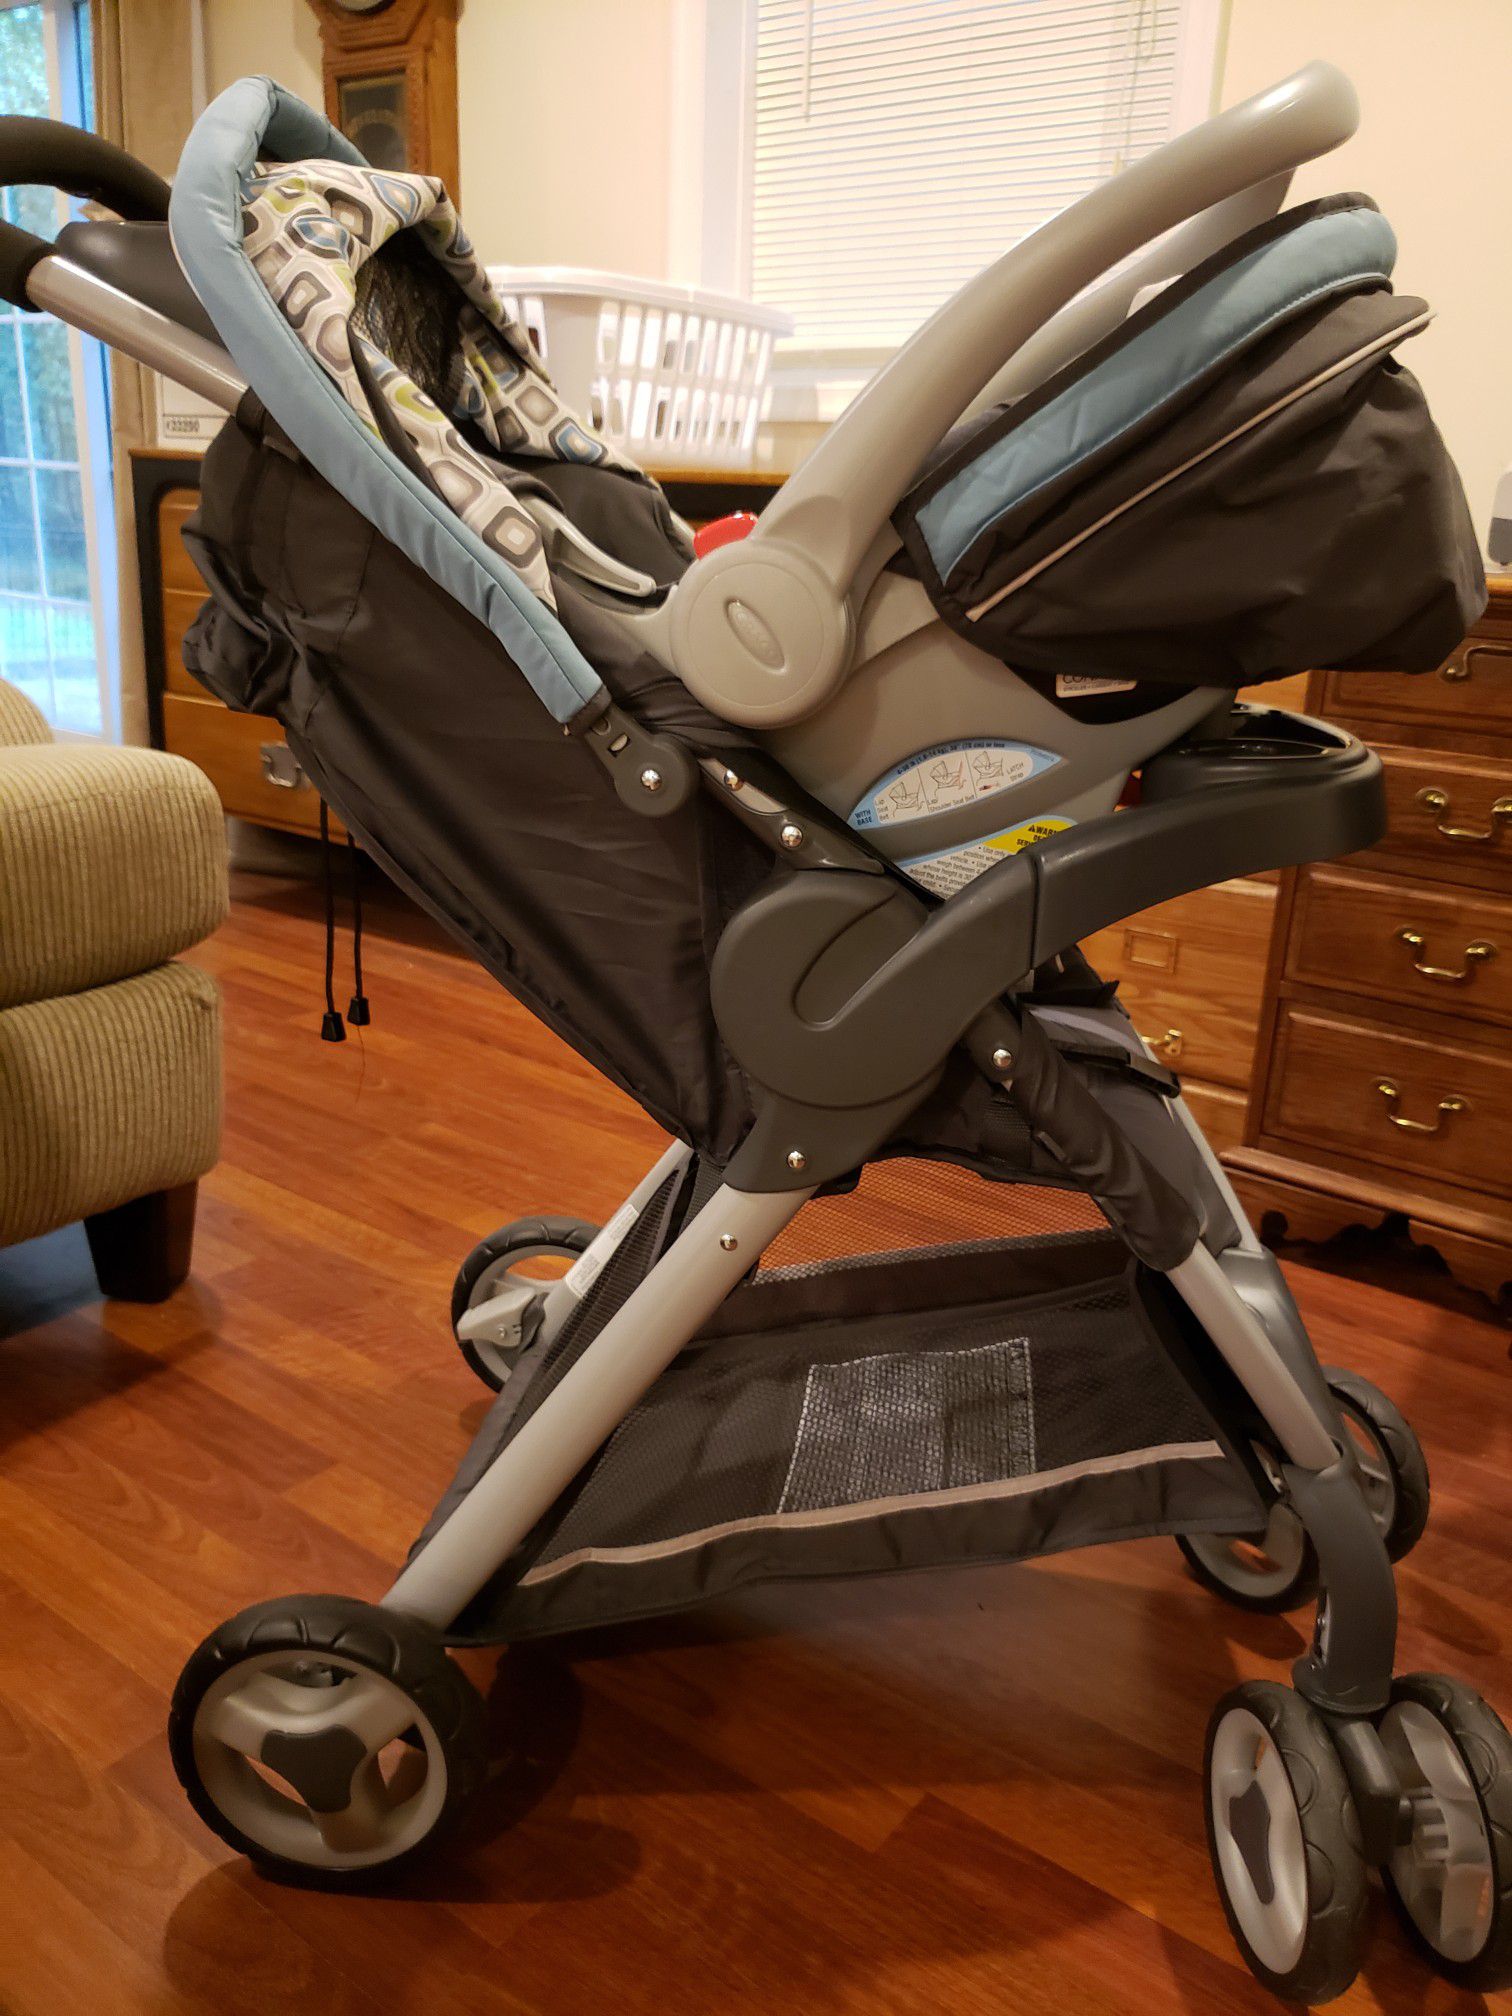 Graco FastAction Fold stroller and Snugride infant car seat